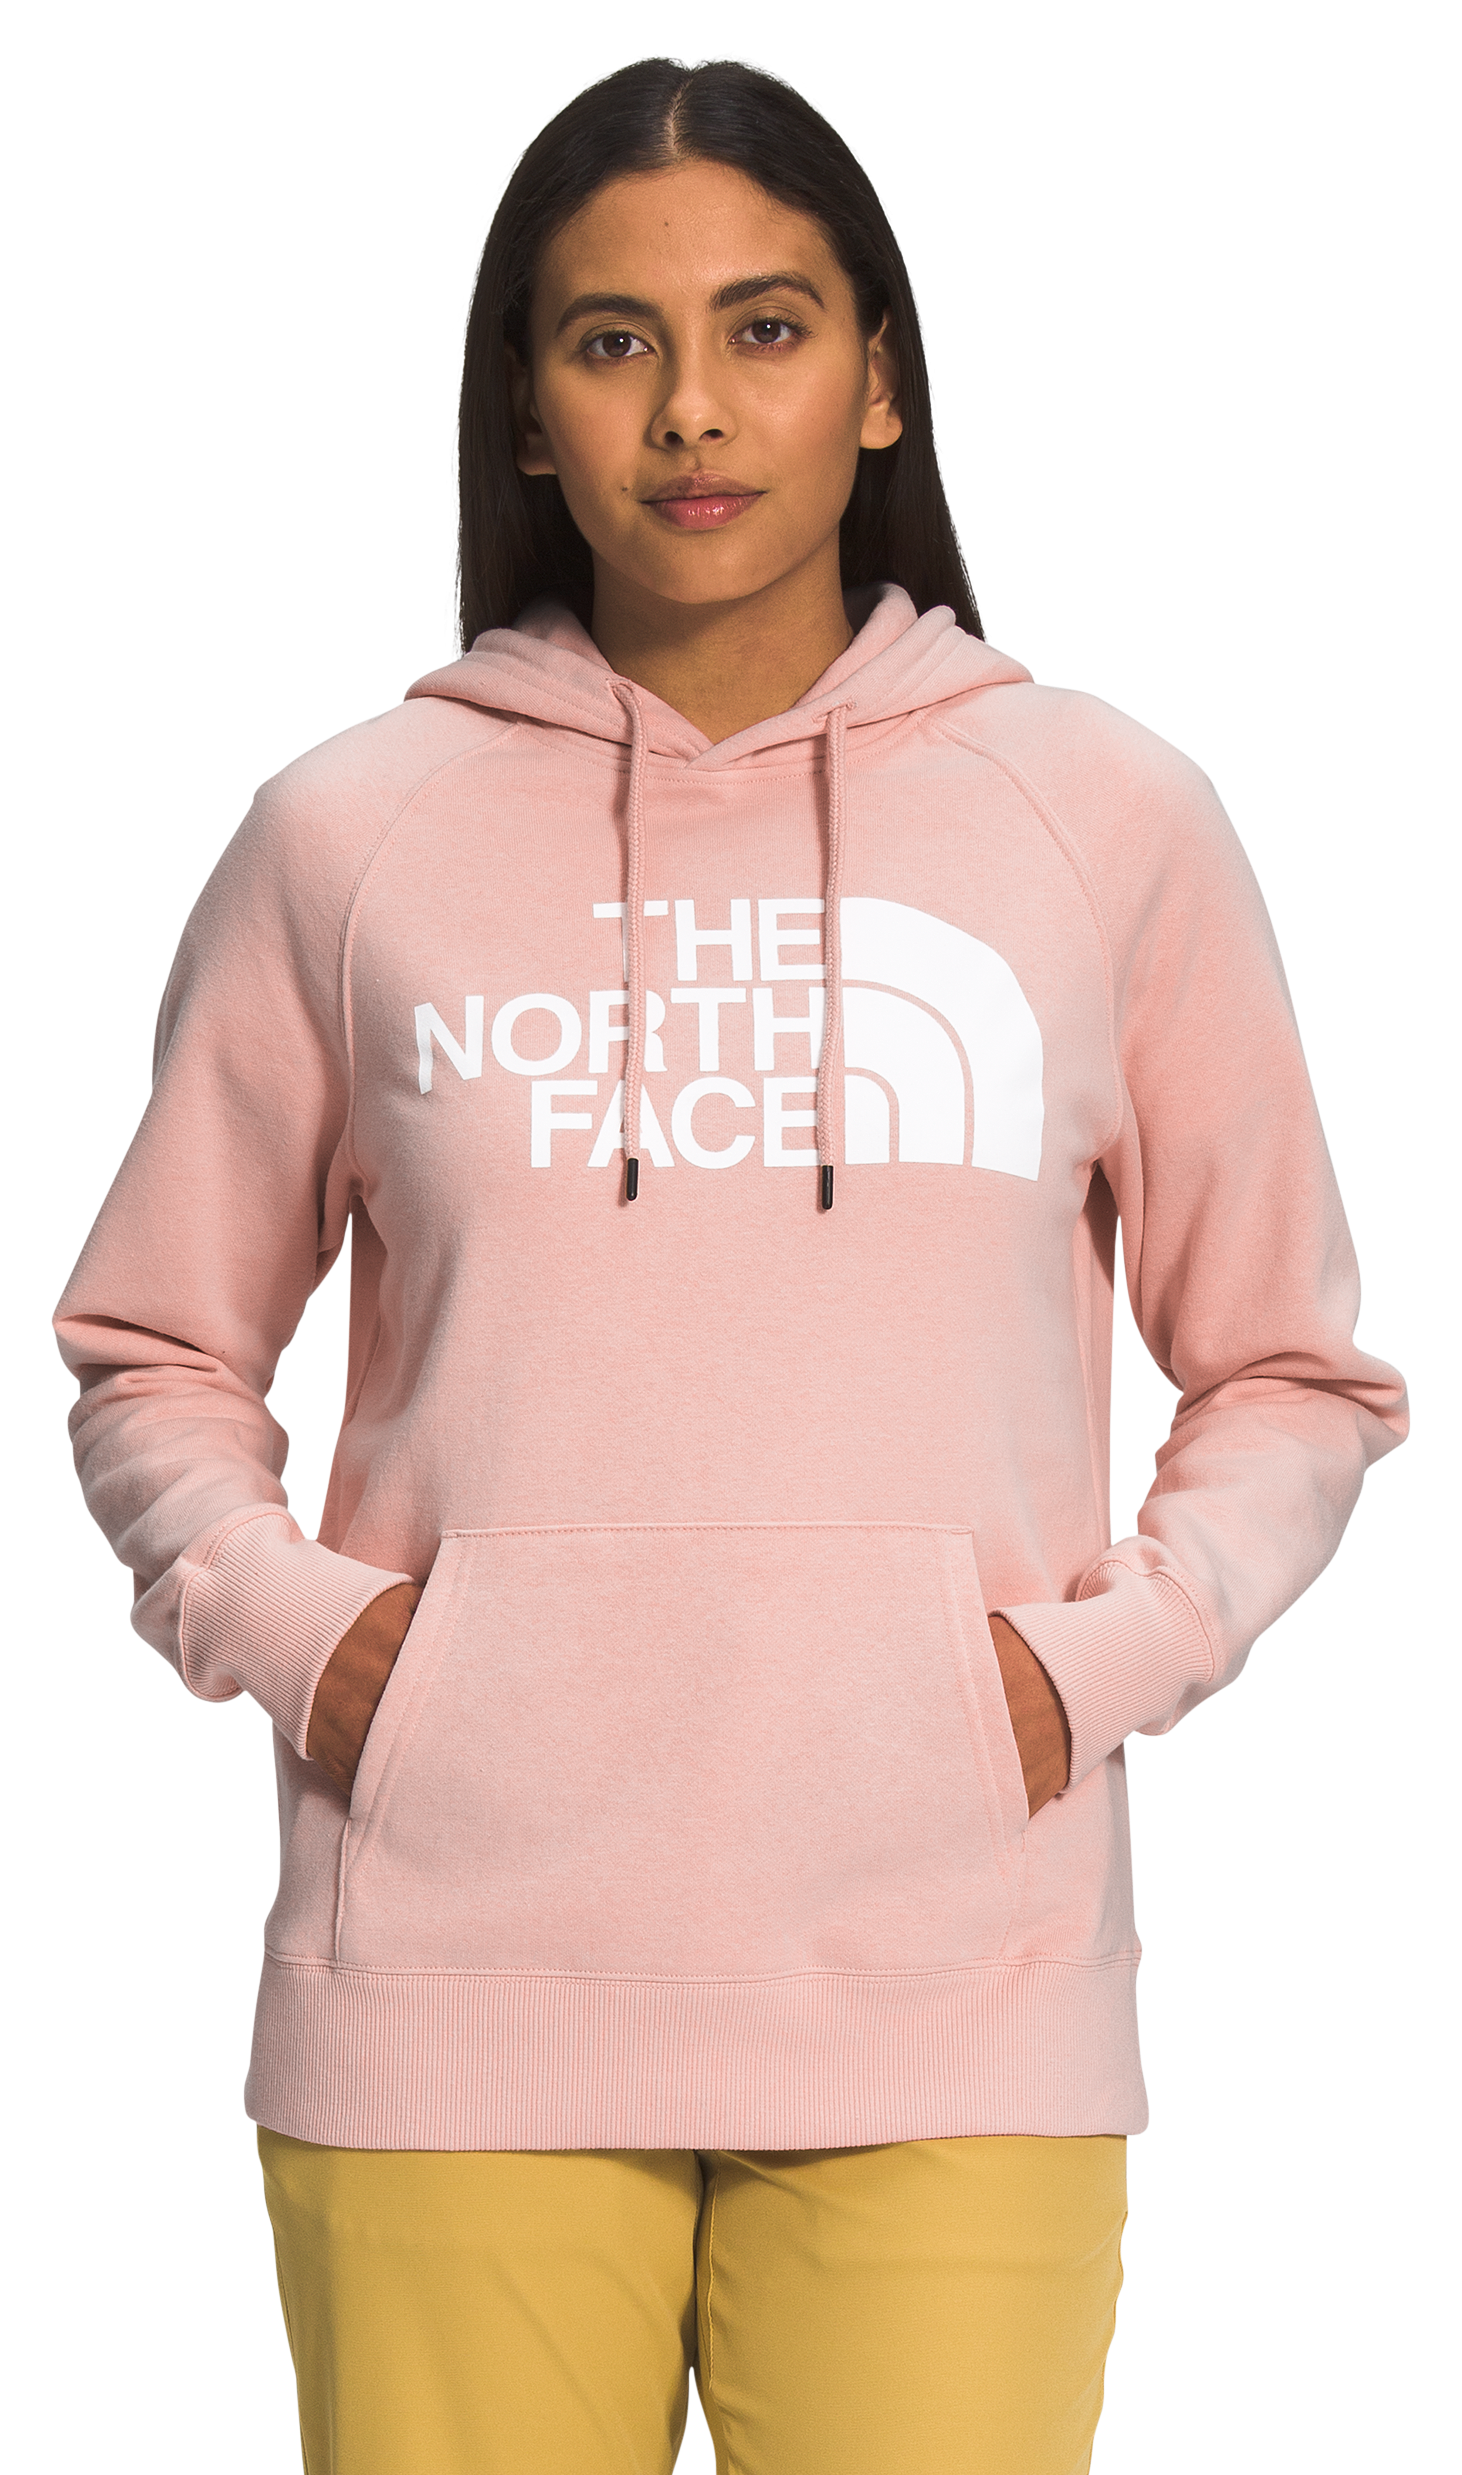 The North Face Half Dome Pullover Long-Sleeve Hoodie for Ladies - Evening Sand Pink/TNF White - L